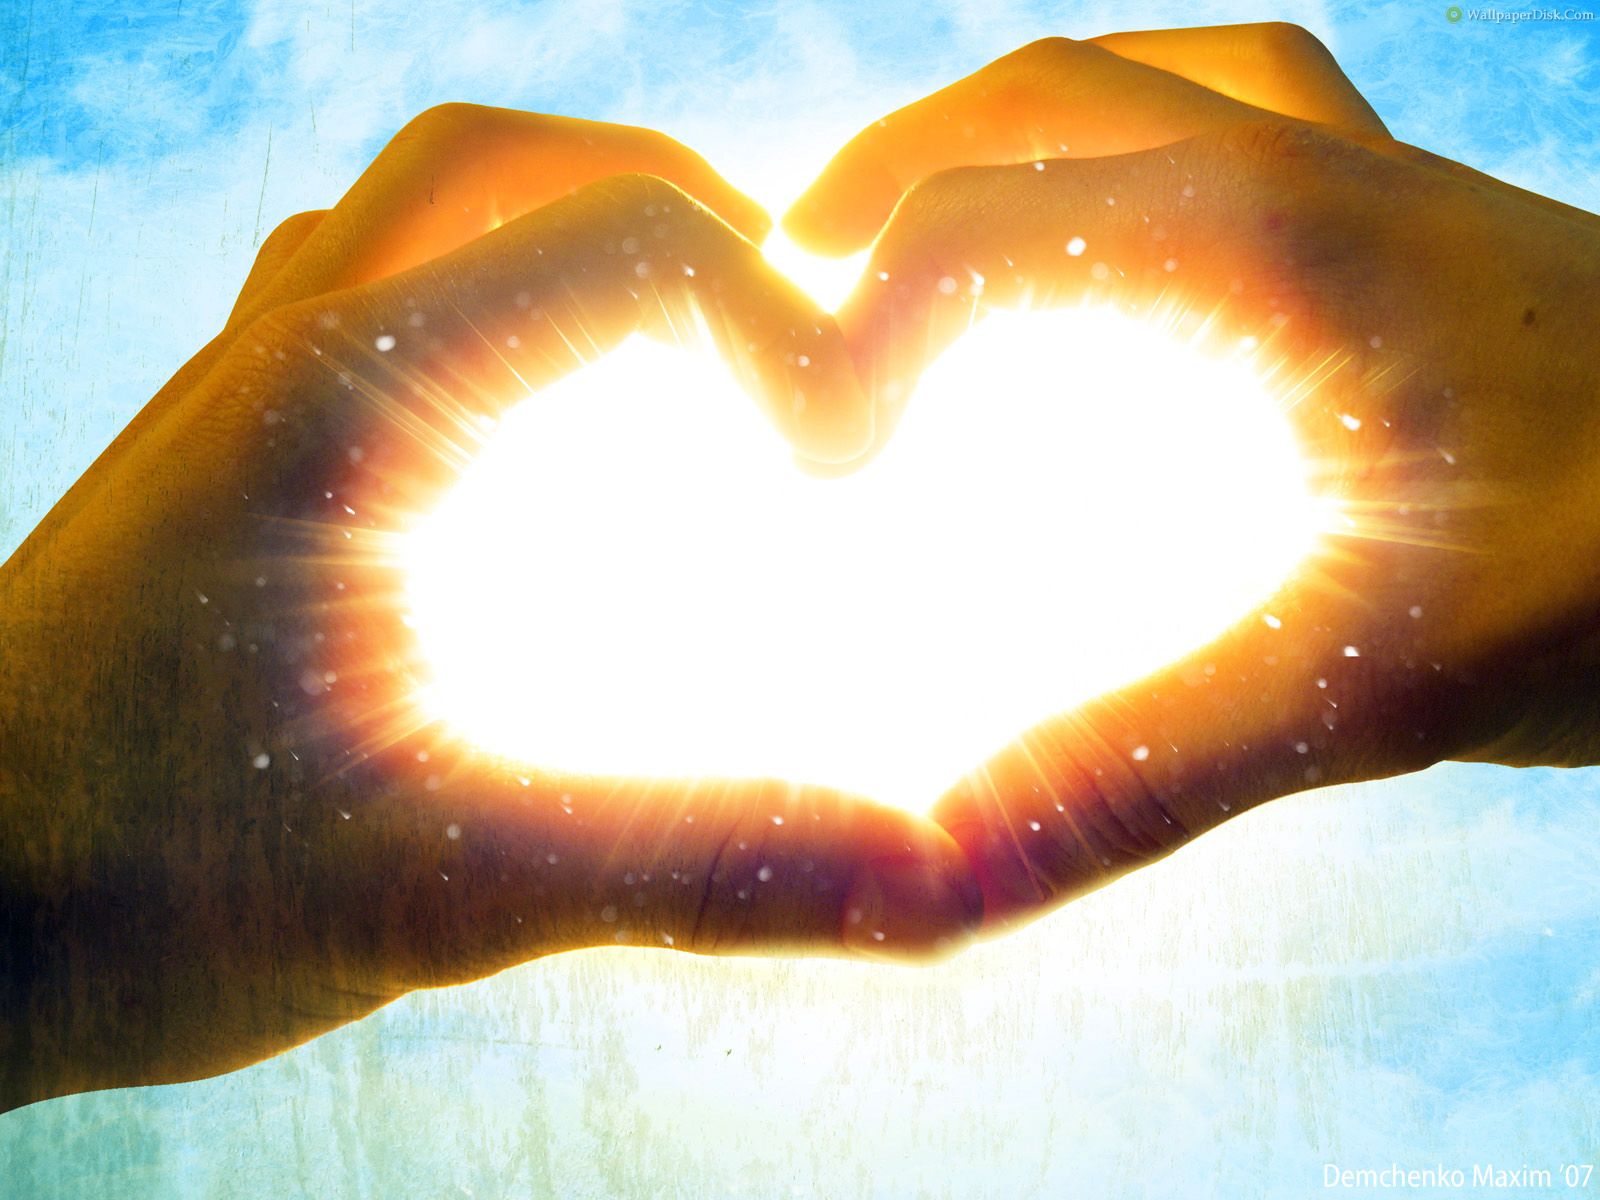 Power Of Love Backgrounds, Compatible - PC, Mobile, Gadgets| 1600x1200 px